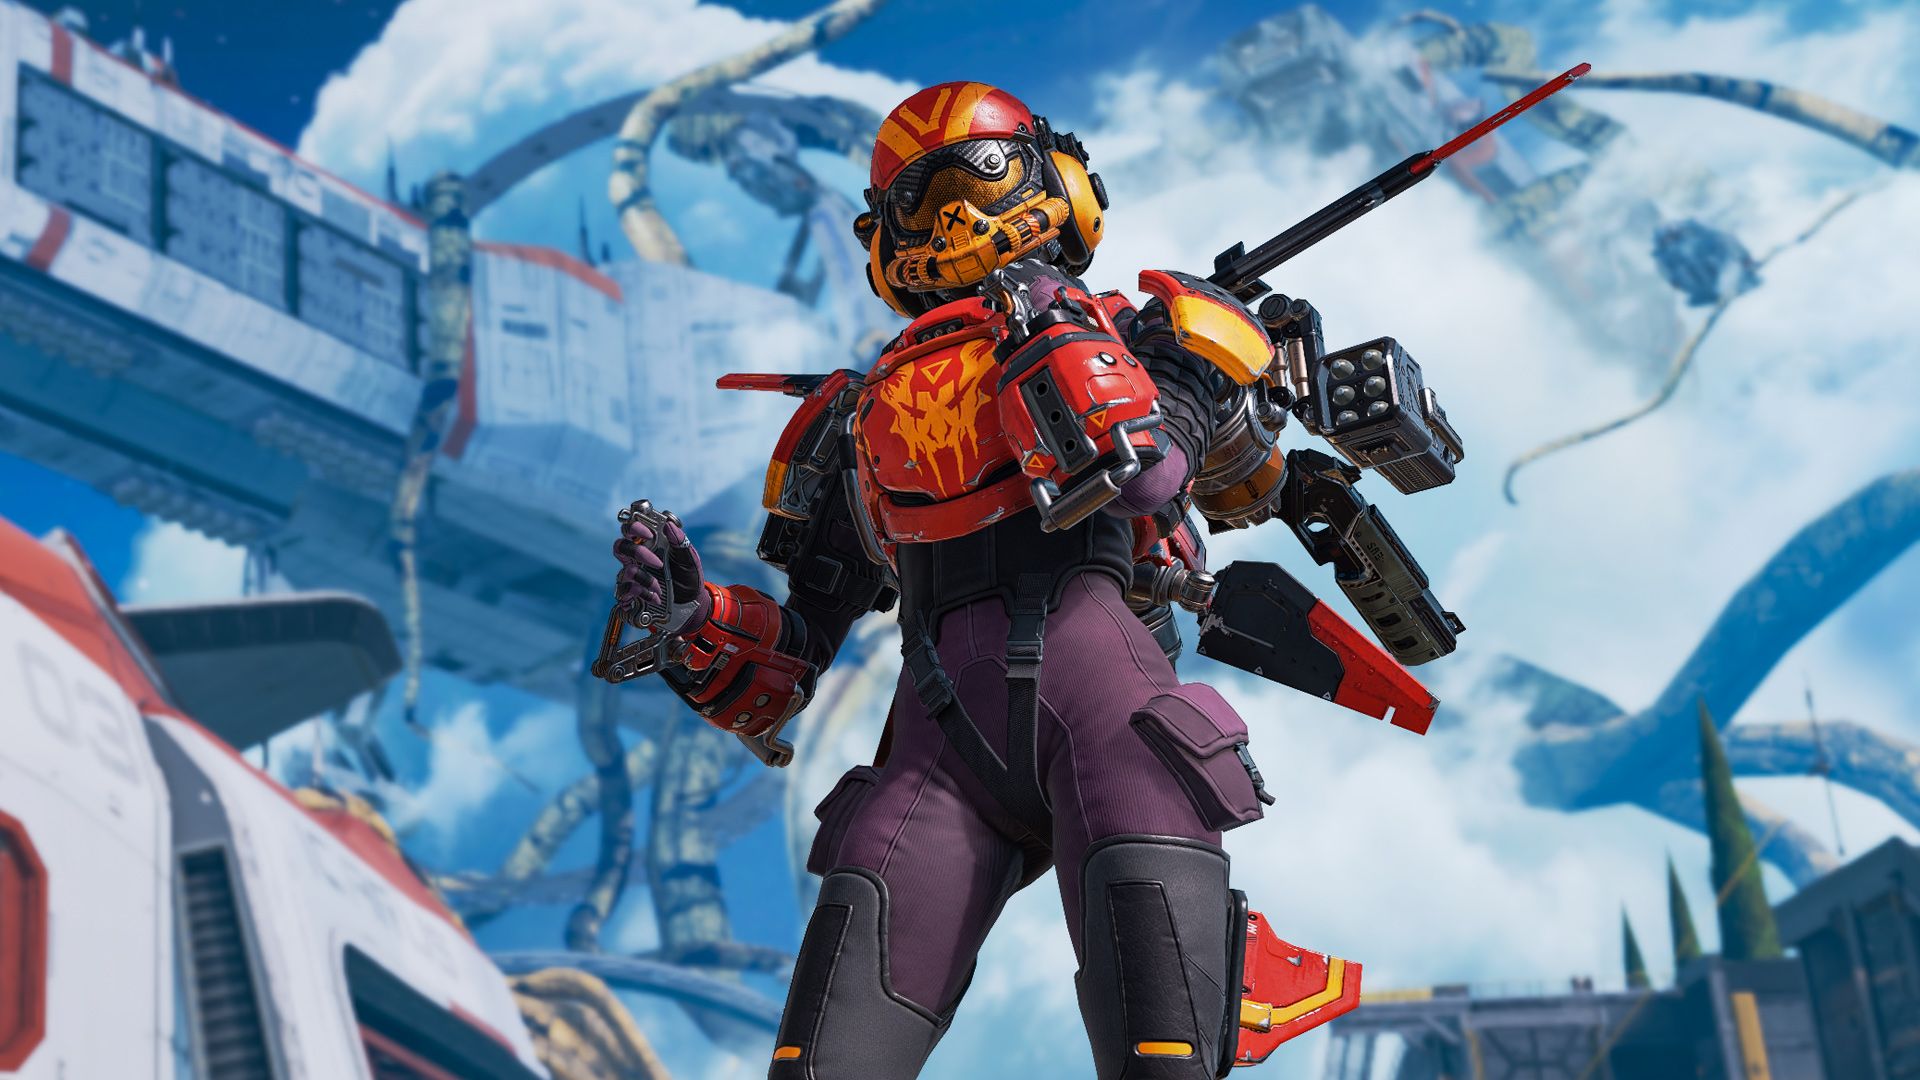 Apex Legends servers are recovering after a Season 9 player surge